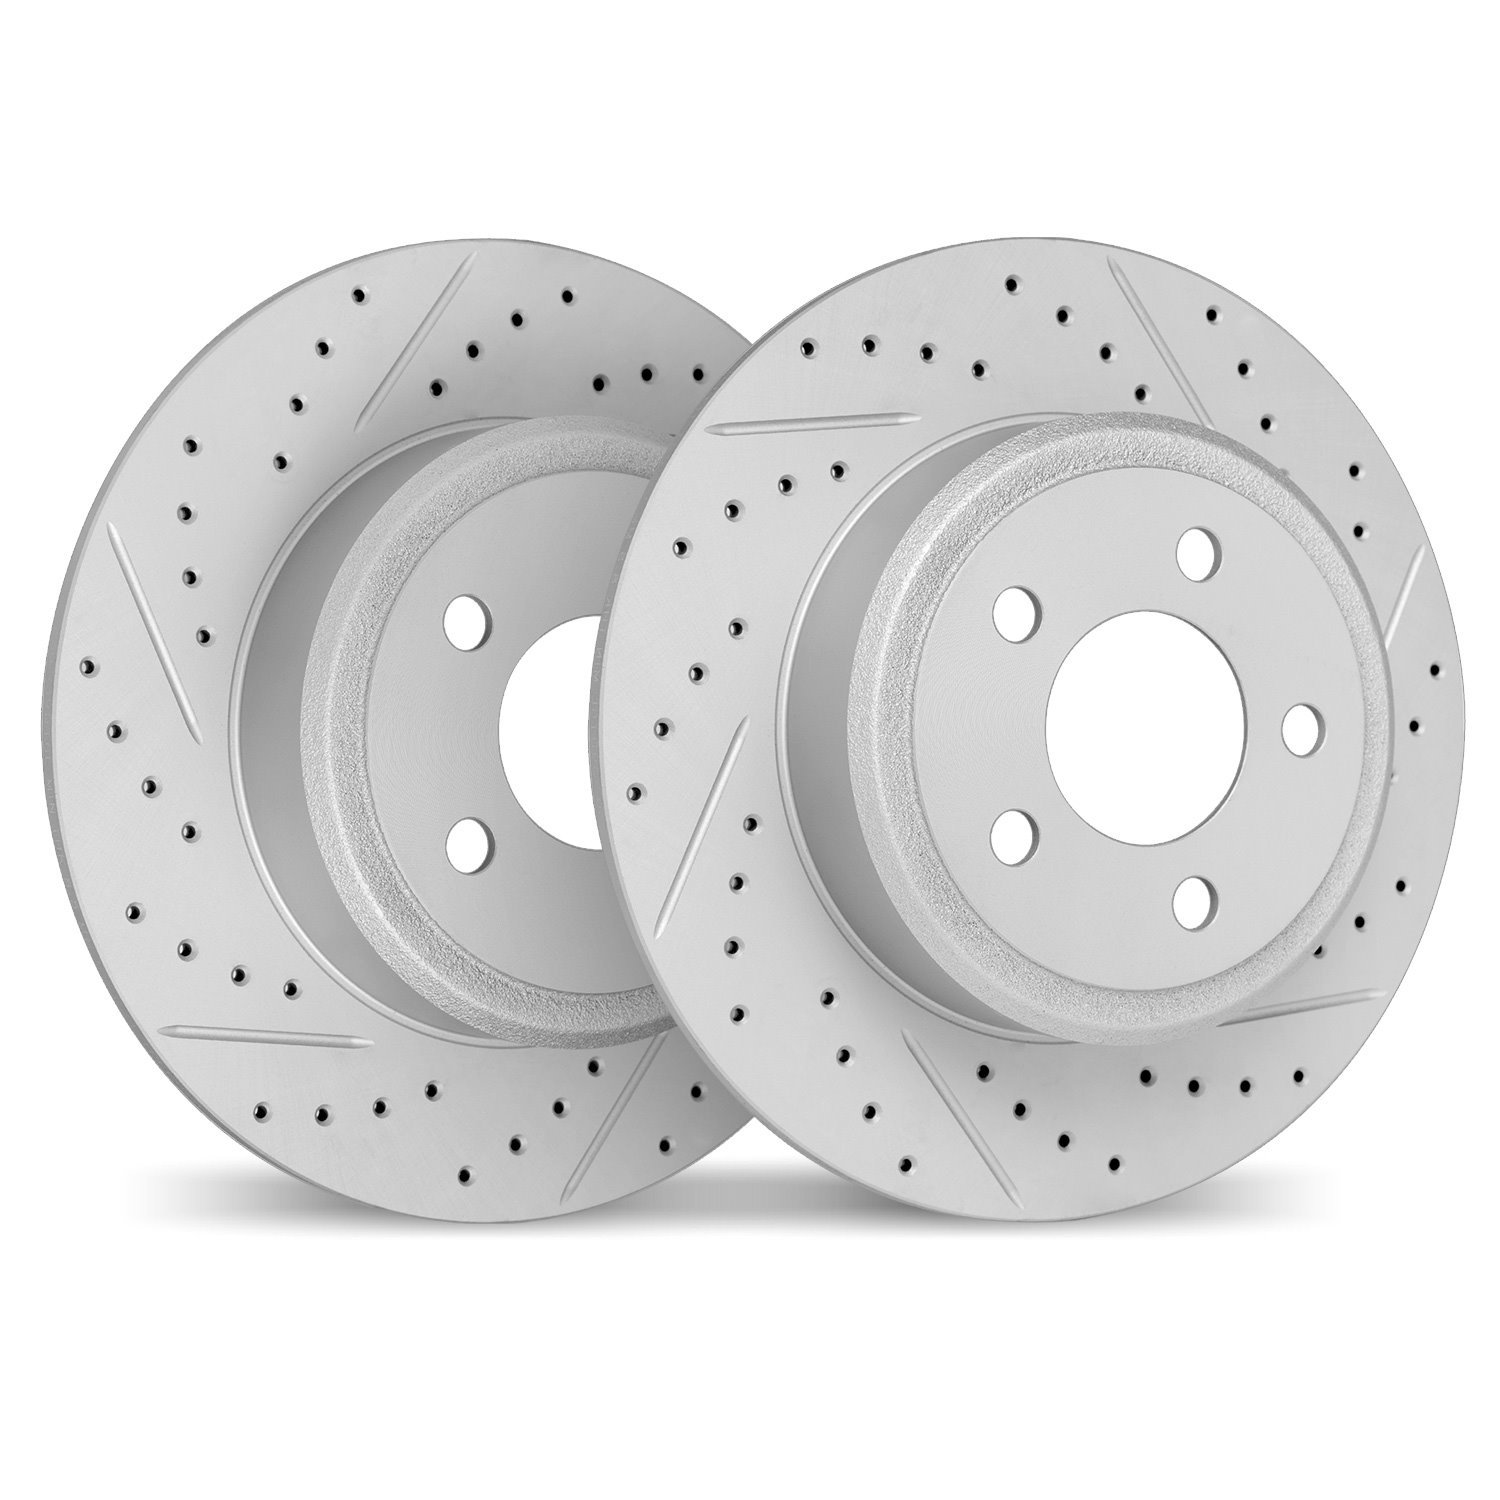 2002-53004 Geoperformance Drilled/Slotted Brake Rotors, 2002-2008 GM, Position: Rear